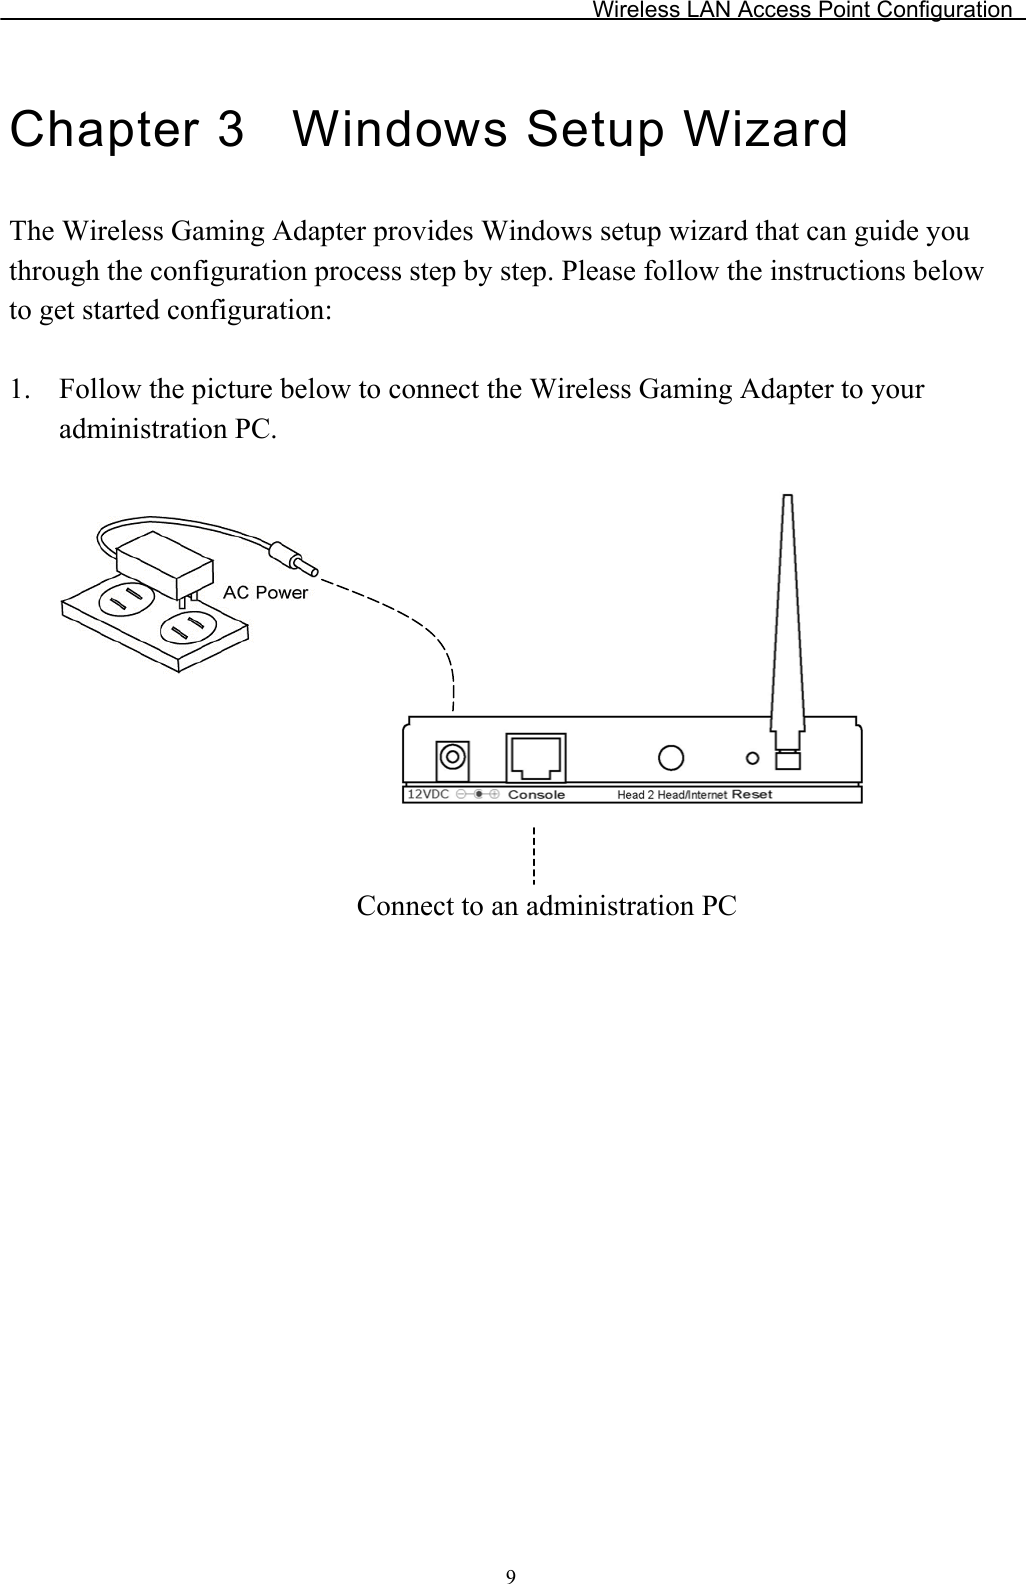 Wireless LAN Access Point Configuration Chapter 3  Windows Setup Wizard The Wireless Gaming Adapter provides Windows setup wizard that can guide you through the configuration process step by step. Please follow the instructions below to get started configuration: 1. Follow the picture below to connect the Wireless Gaming Adapter to your administration PC. Connect to an administration PC9